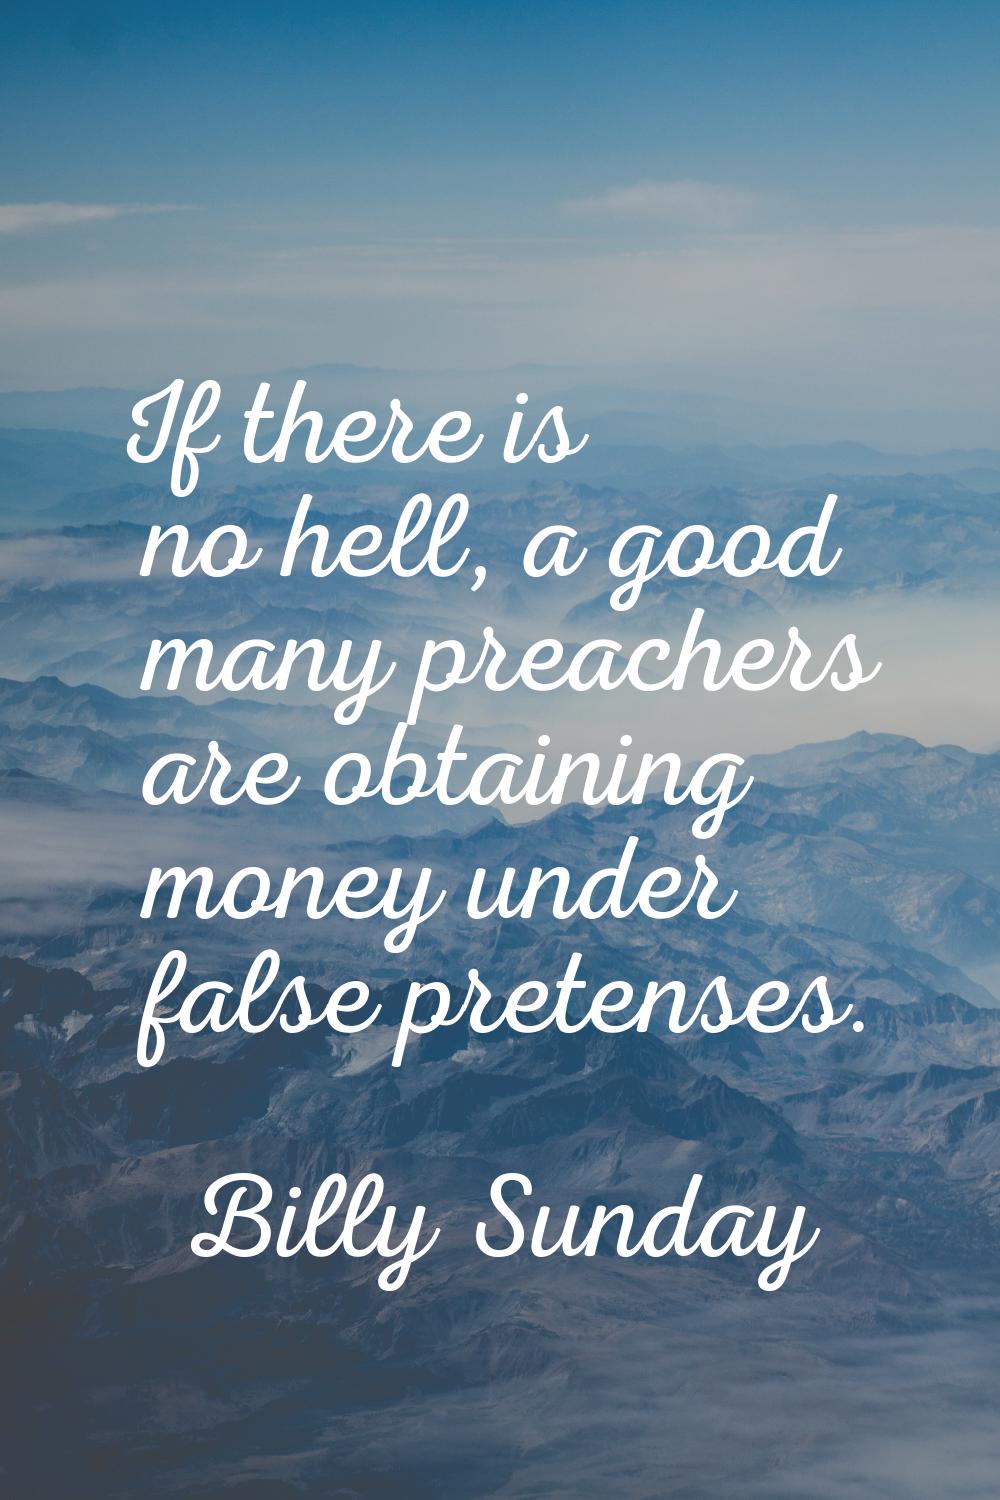 If there is no hell, a good many preachers are obtaining money under false pretenses.